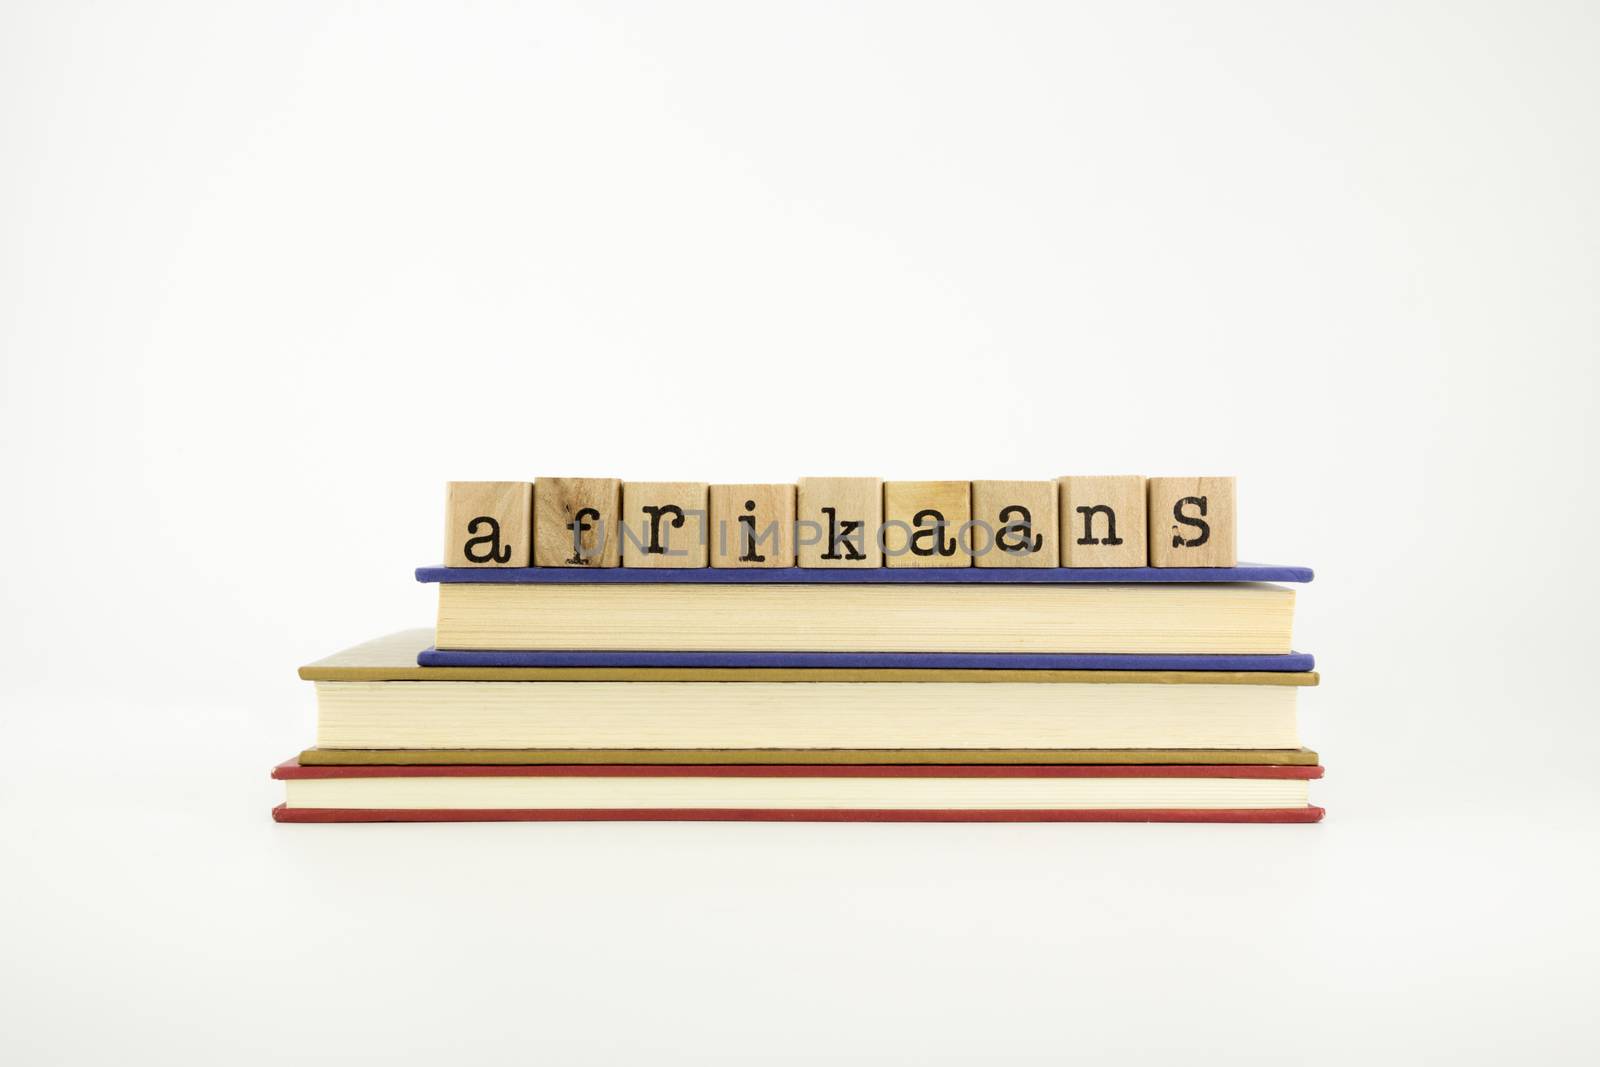 afrikaans word on wood stamps stack on books, language and conversation concept